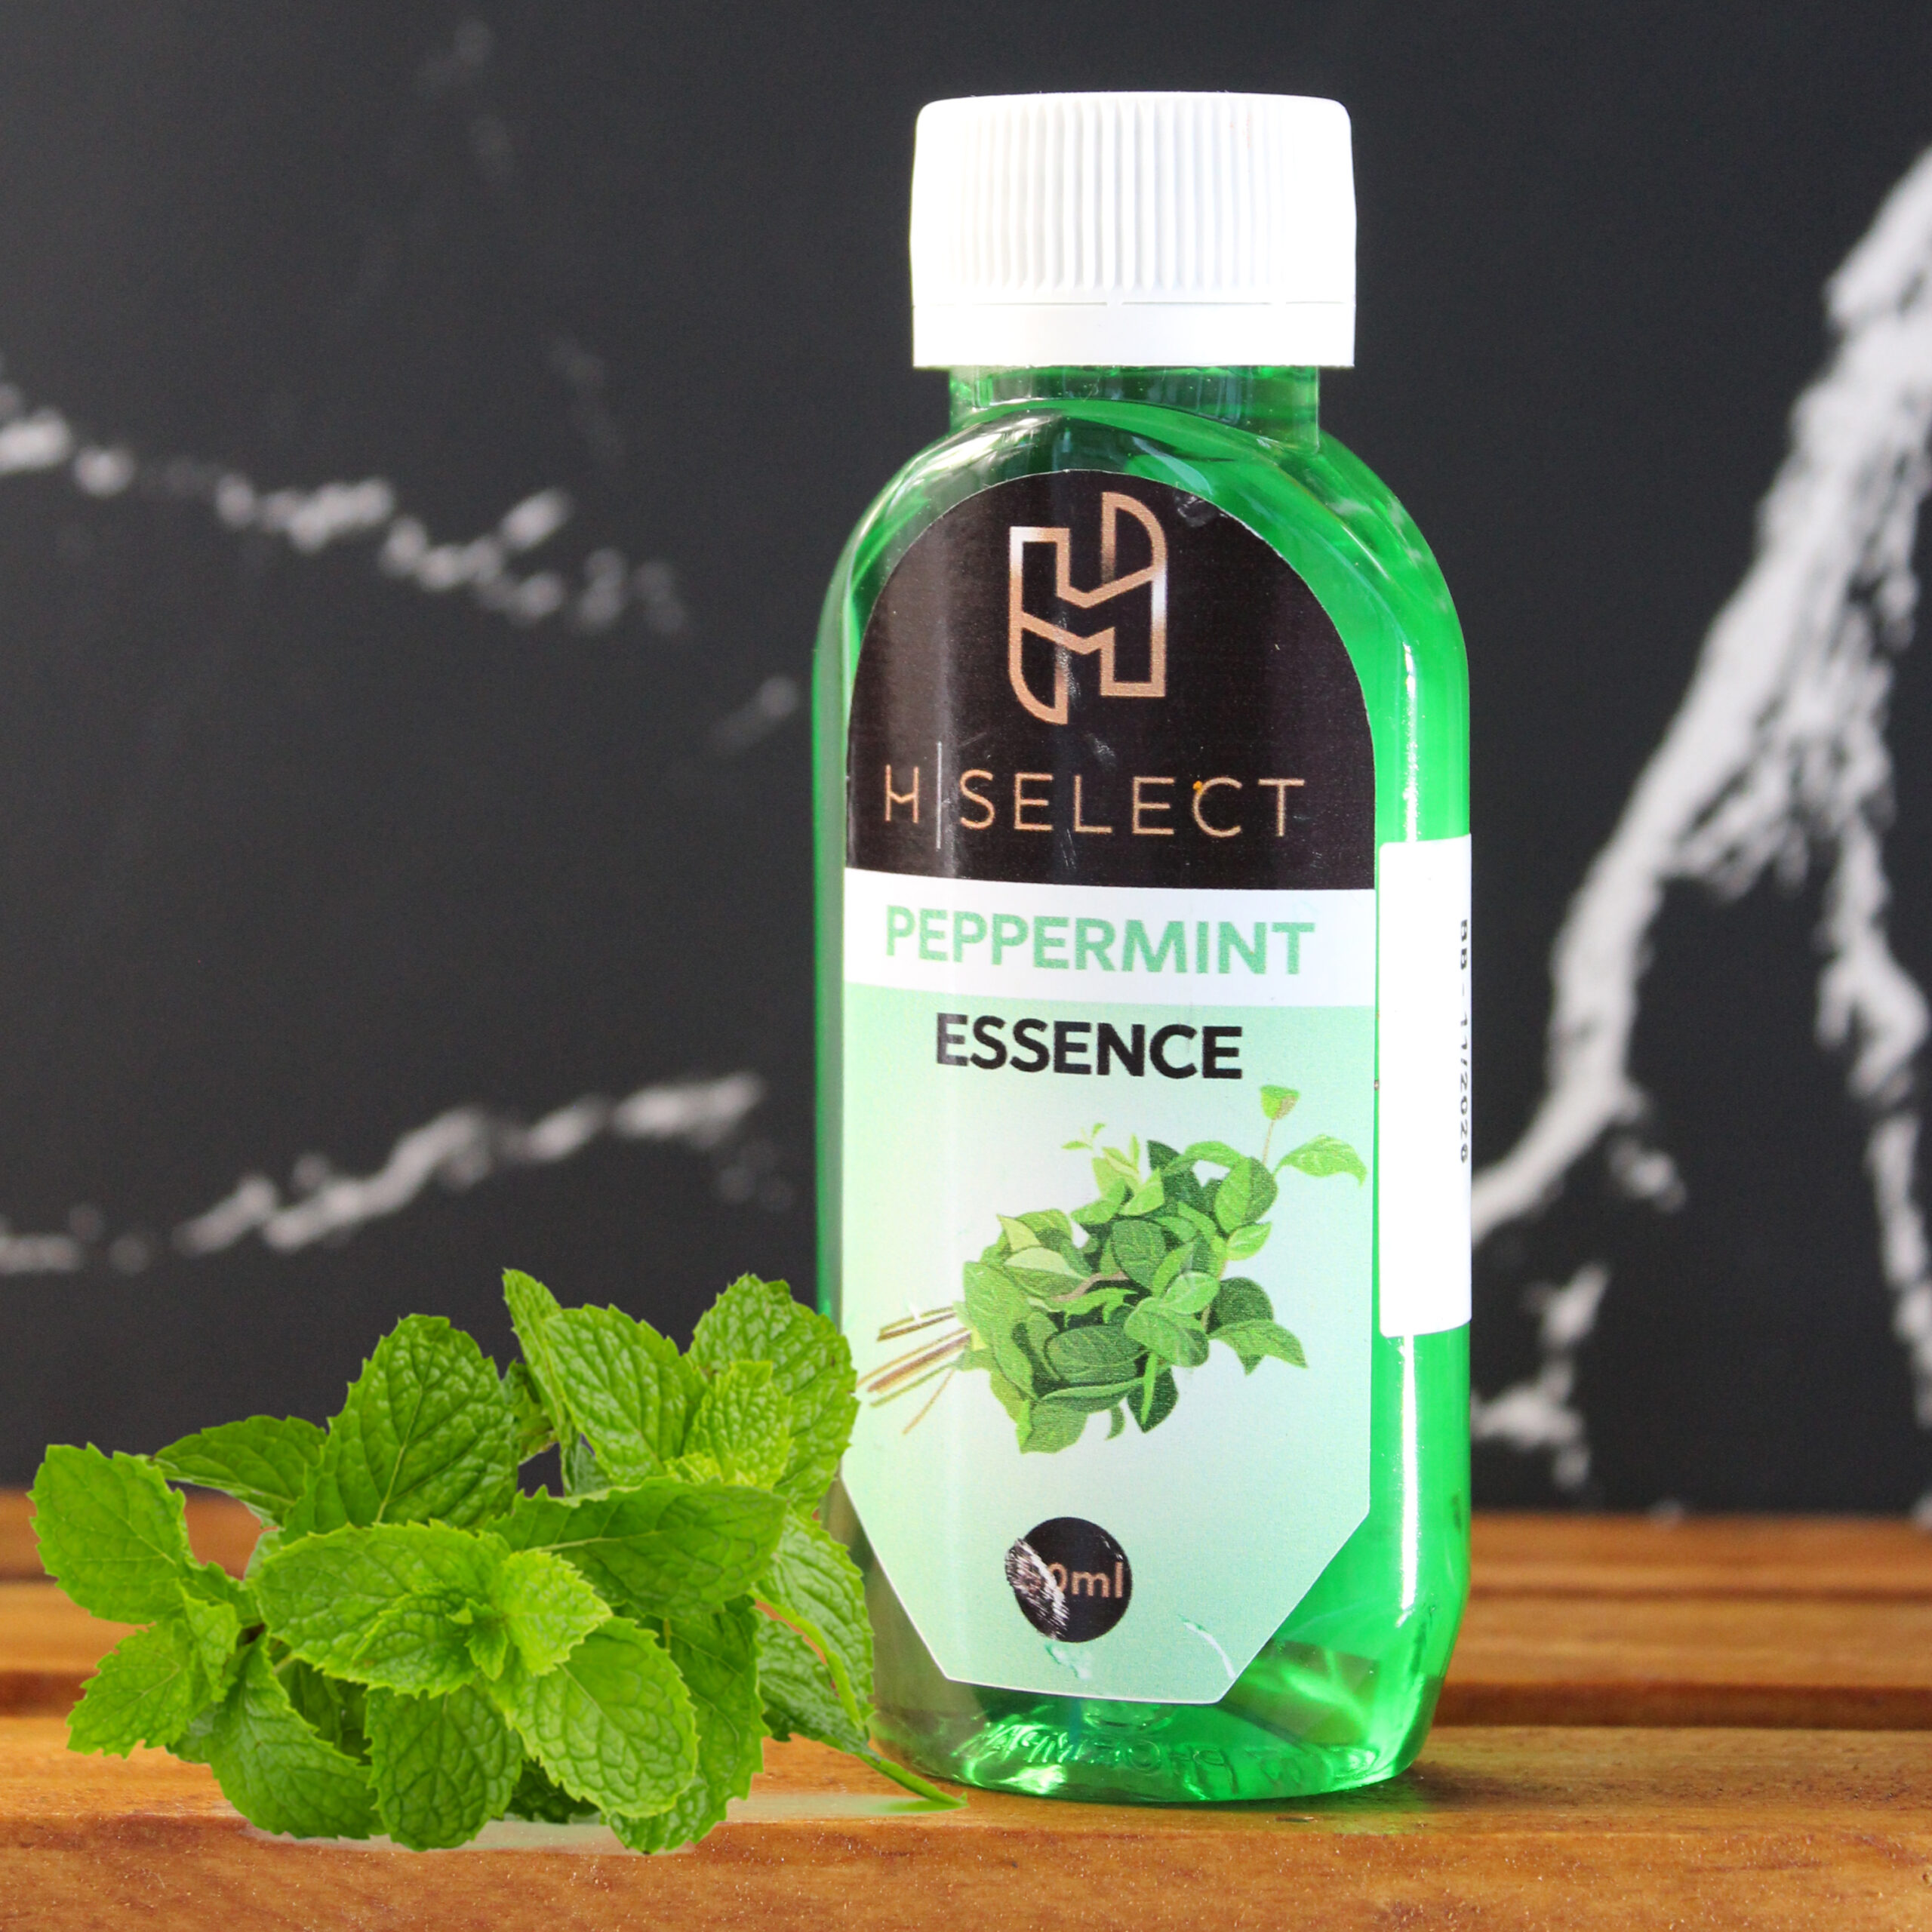 H-SELECT
ESSENCE 50ml
PEPPERMINT